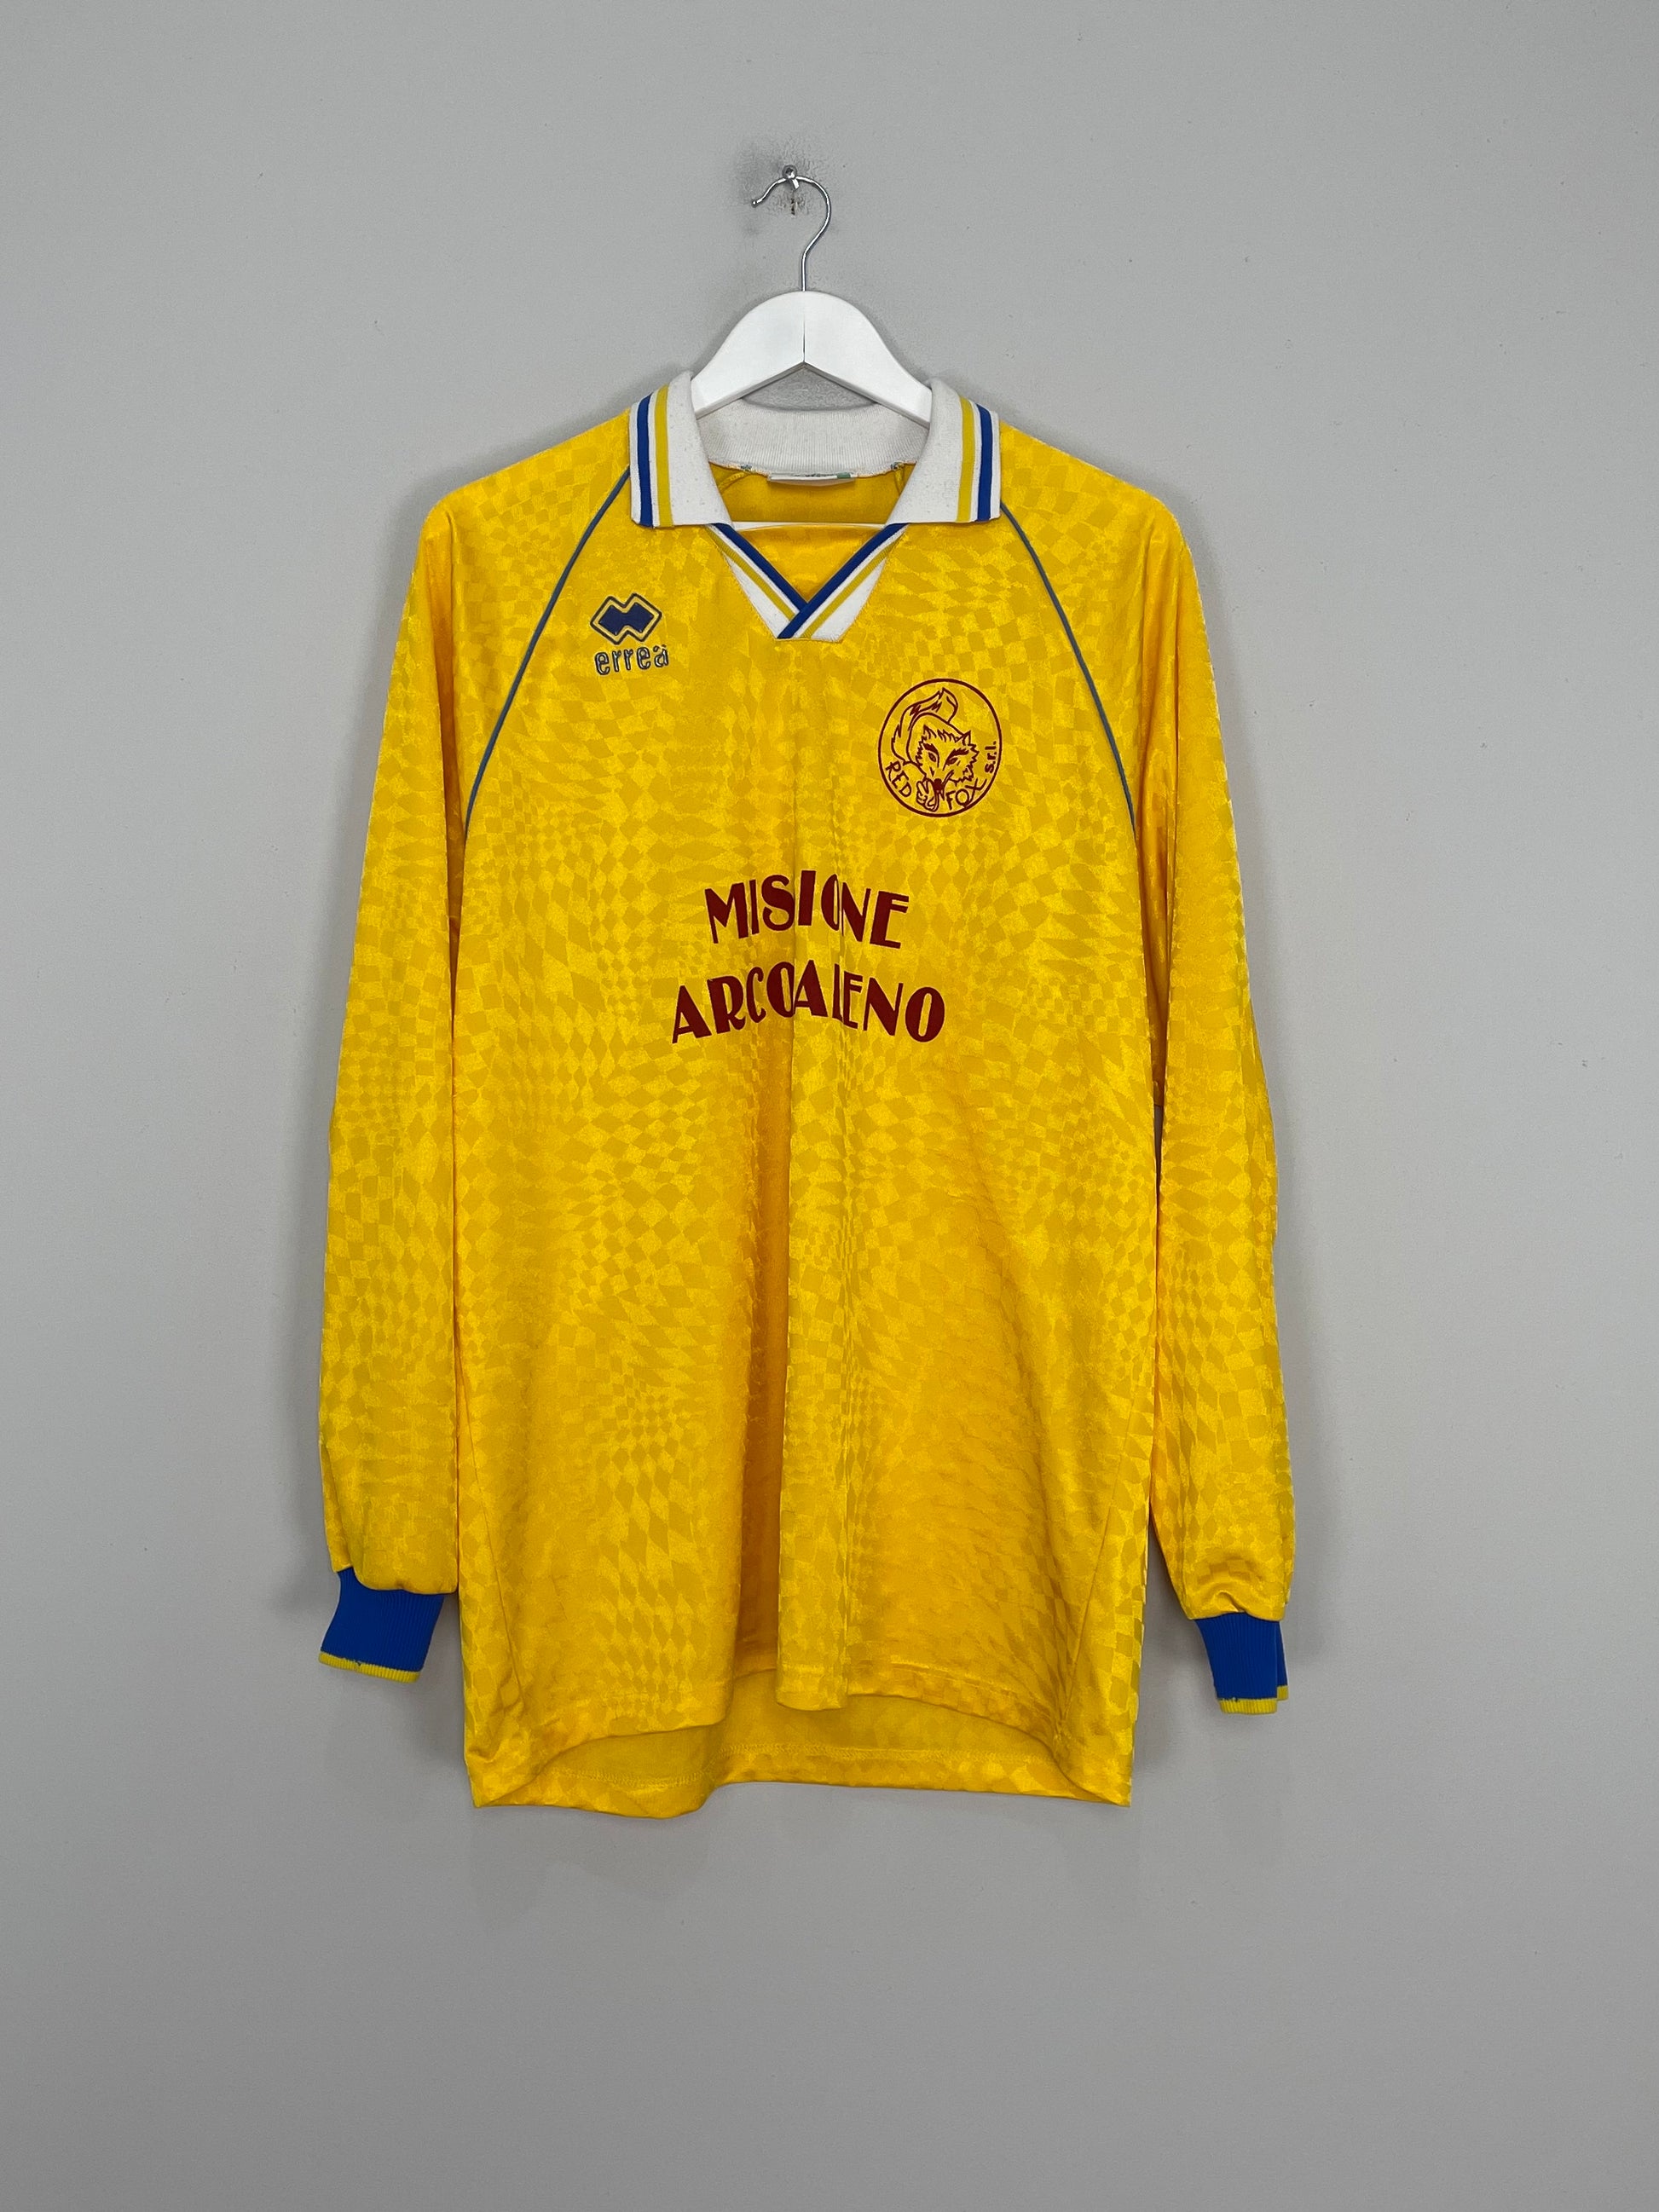 Image of the Red Fox shirt from the 1997/98 season